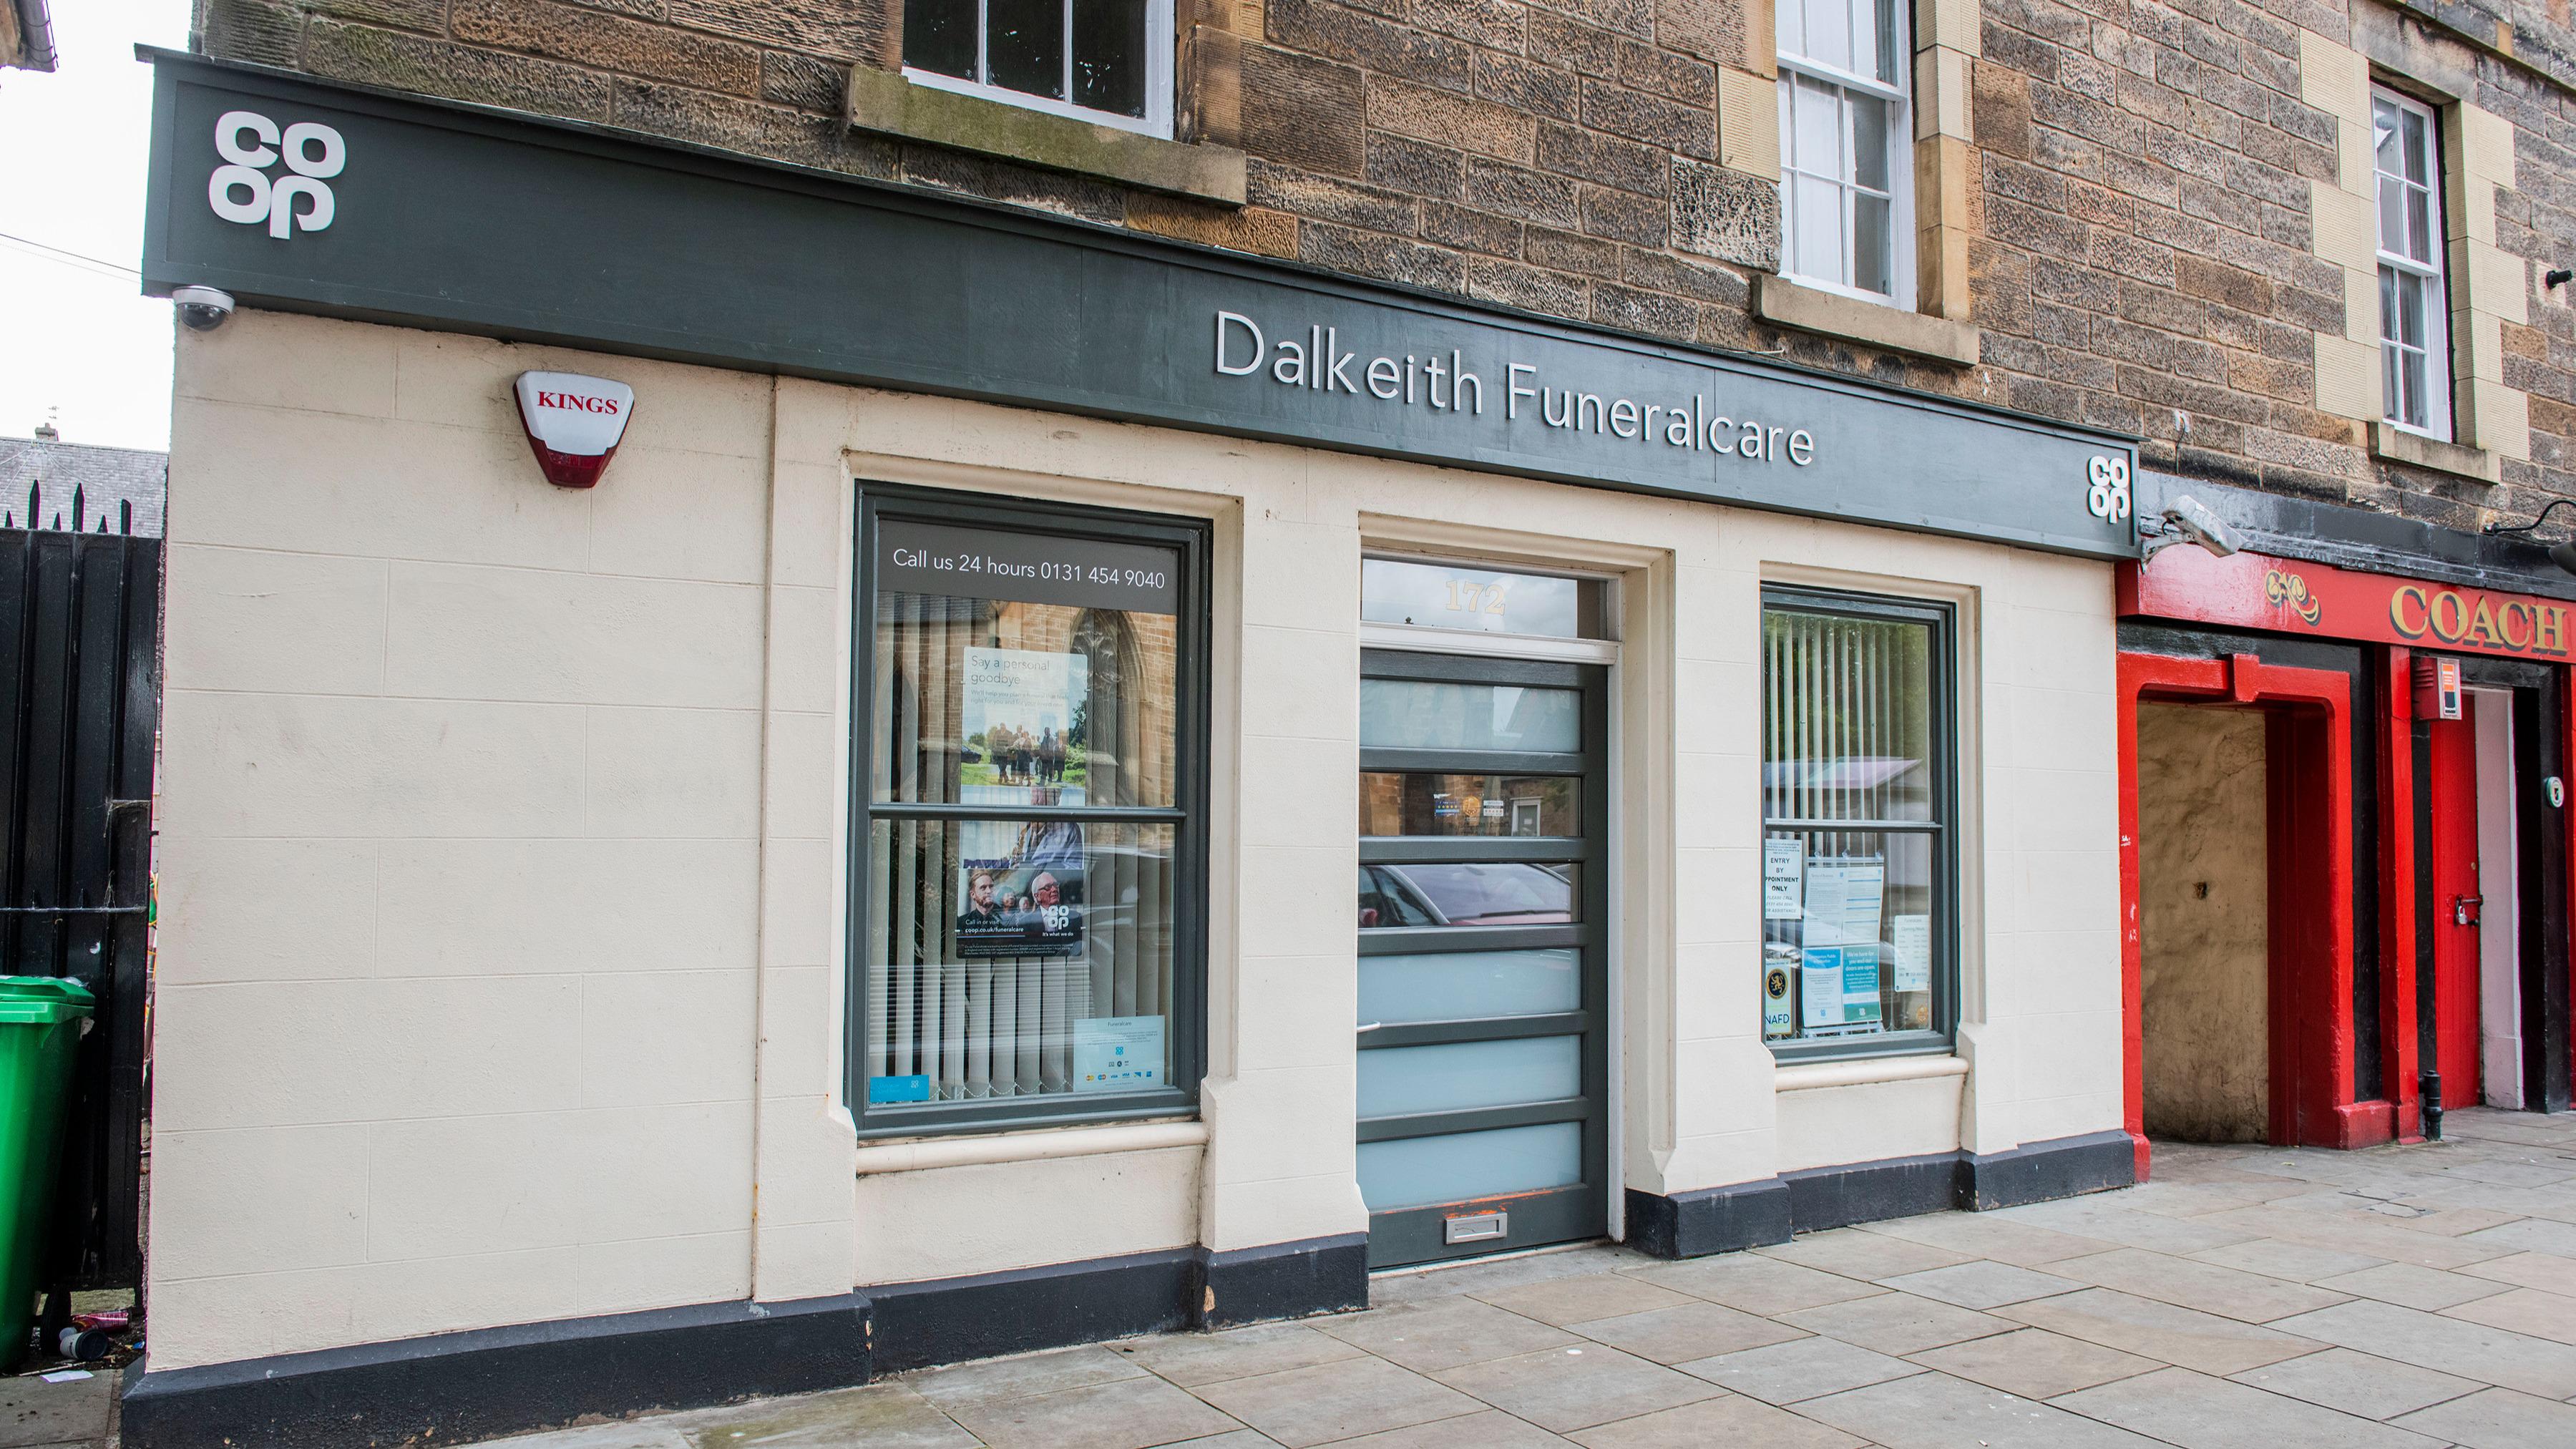 Images Dalkeith Funeralcare